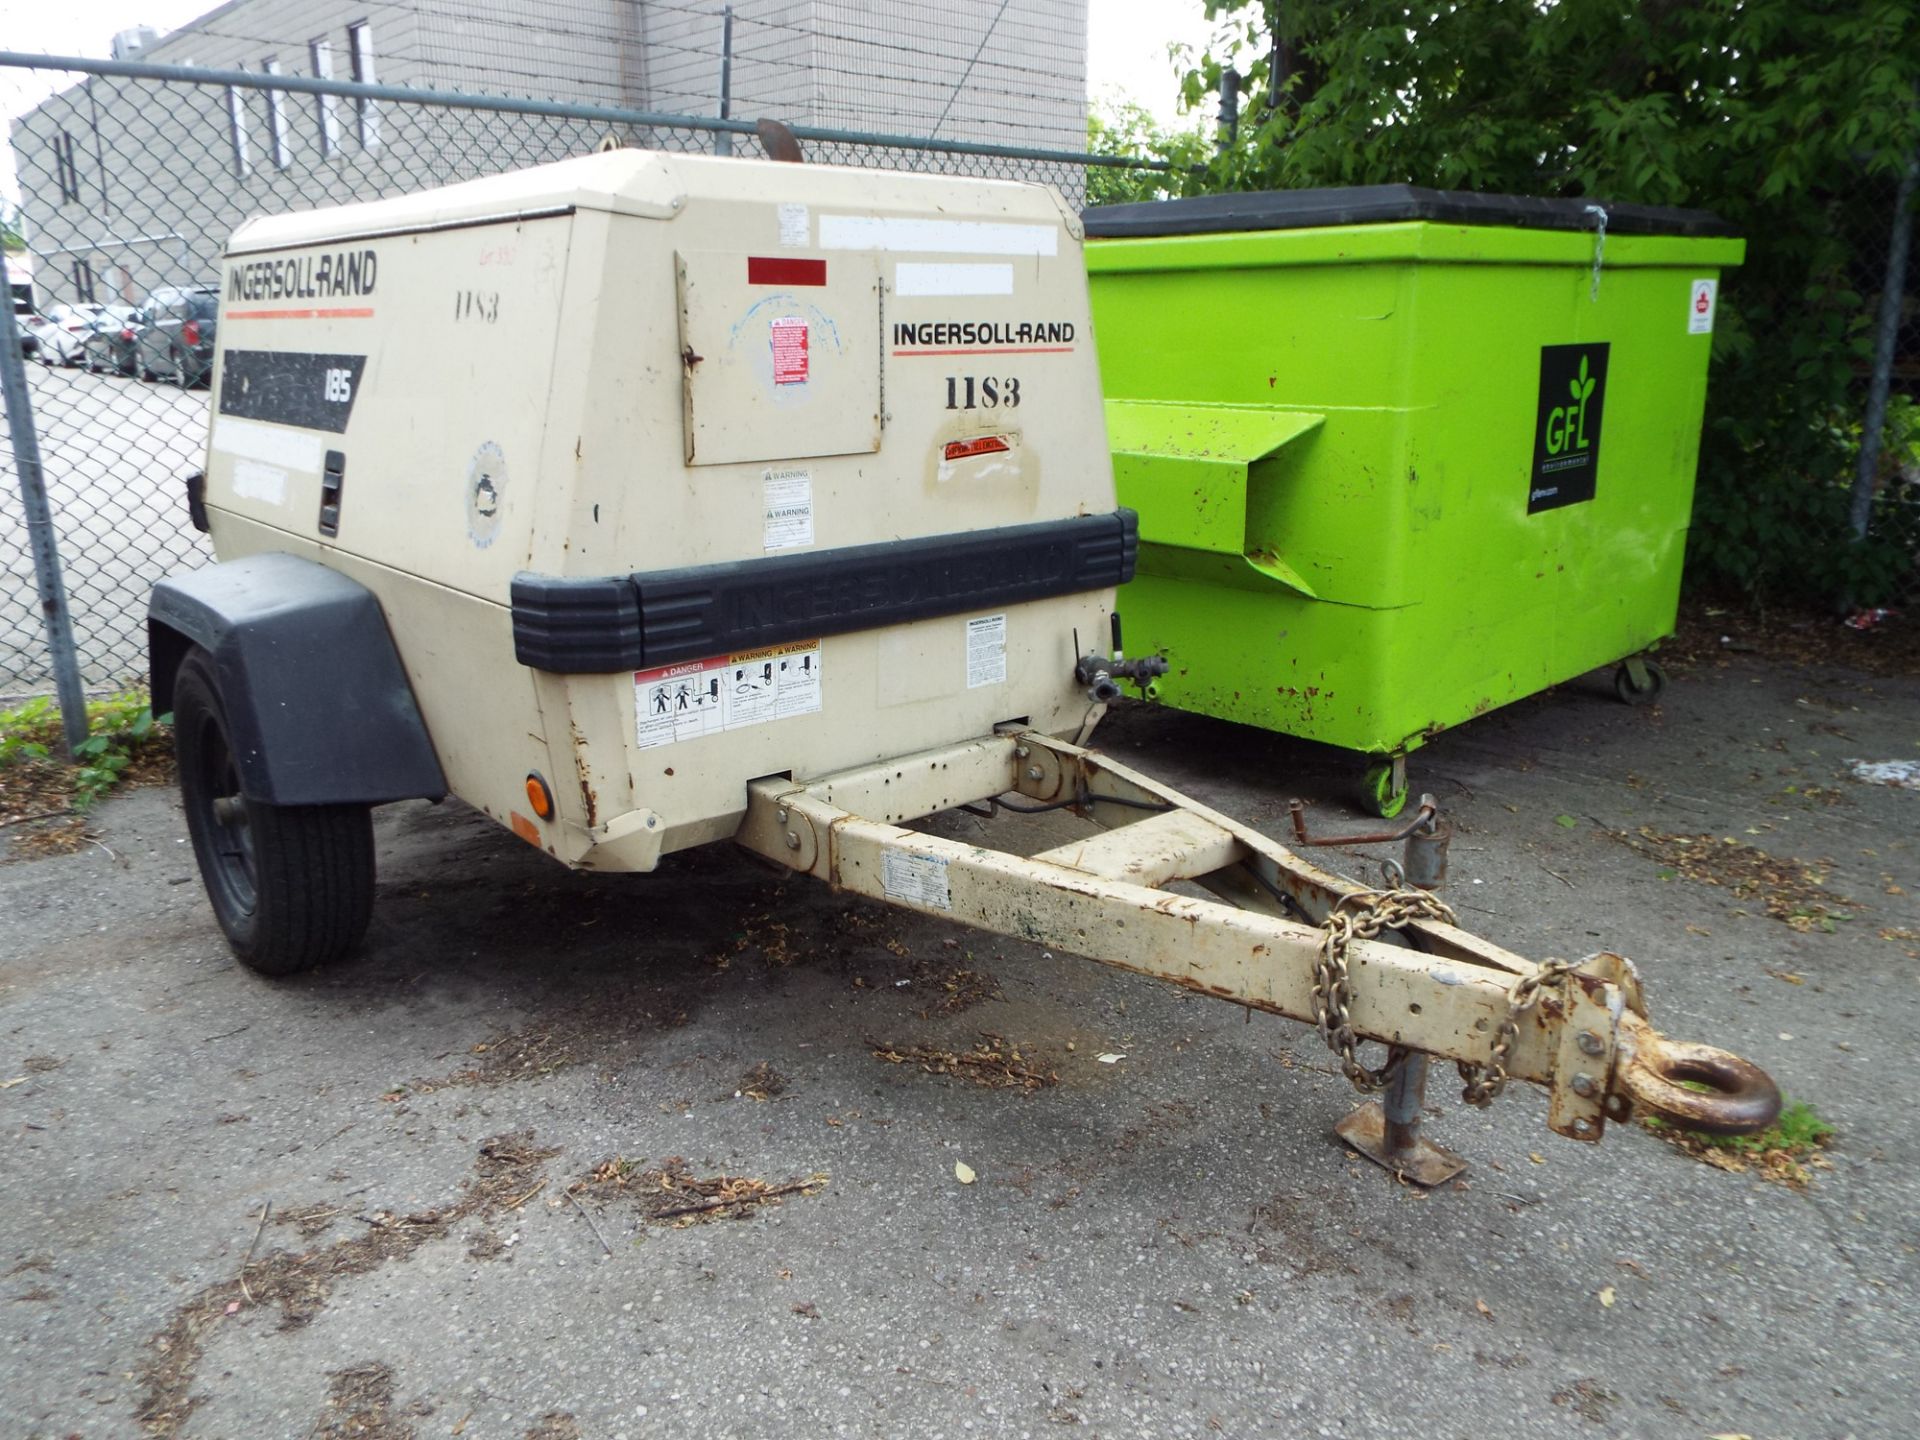 INGERSOLL RAND P185 PORTABLE TOW-BEHIND AIR COMPRESSOR WITH DIESEL ENGINE, S/N: 320067UCL295 - Image 2 of 5